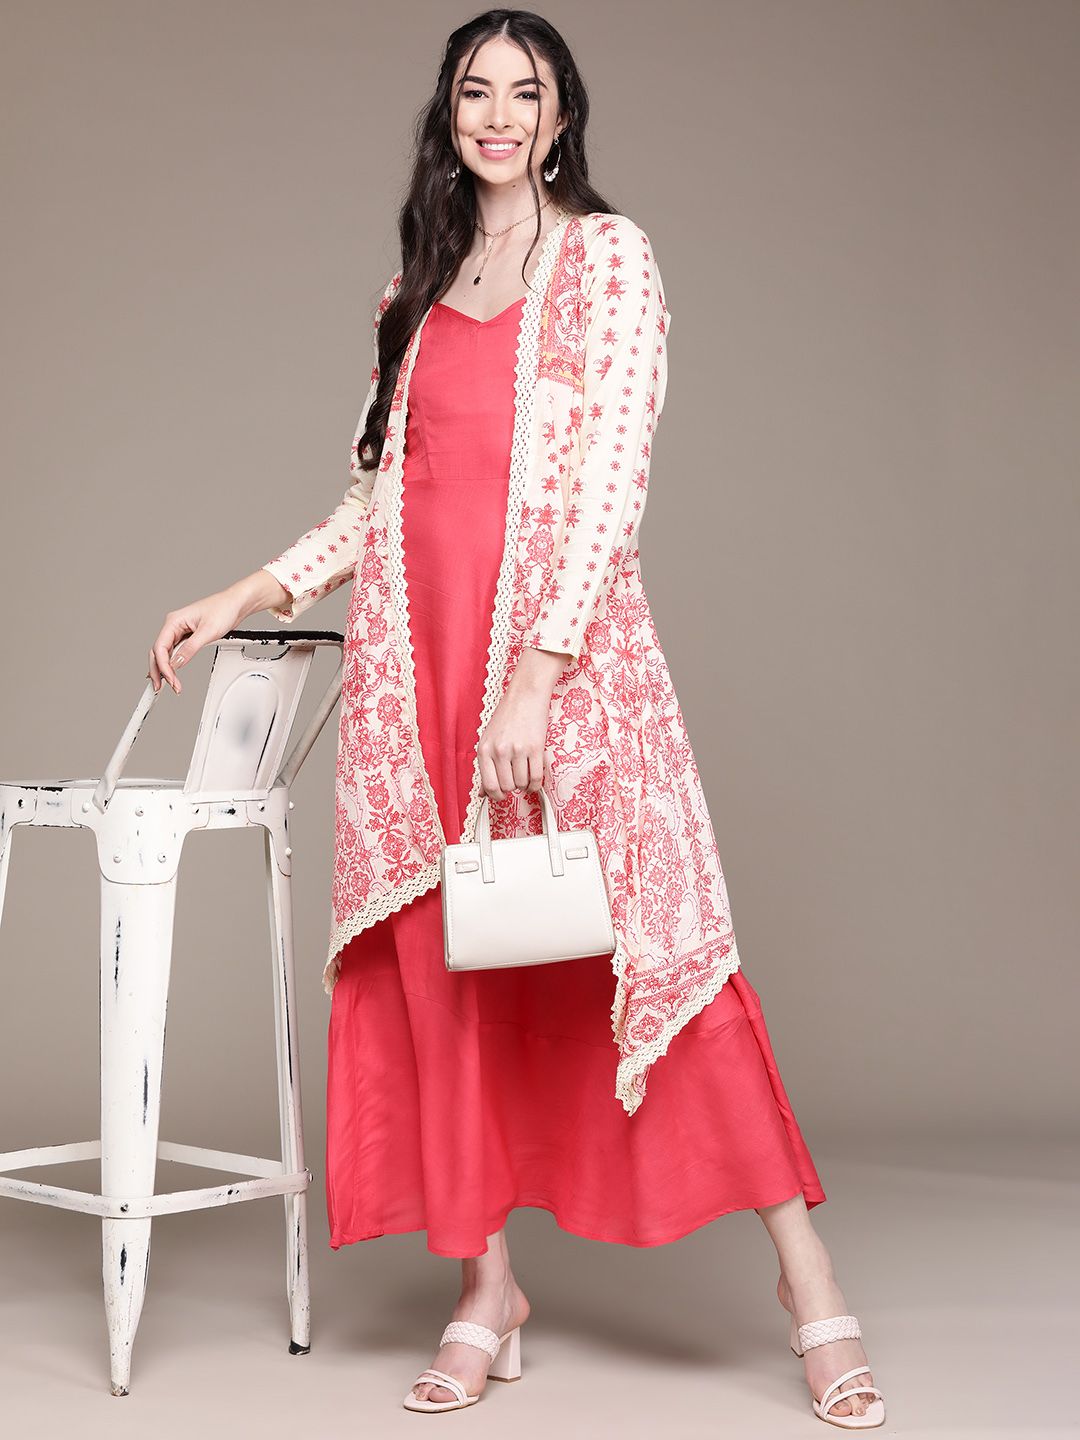 aarke Ritu Kumar Women Pink & Off White Maxi Dress Comes with a Cape Price in India